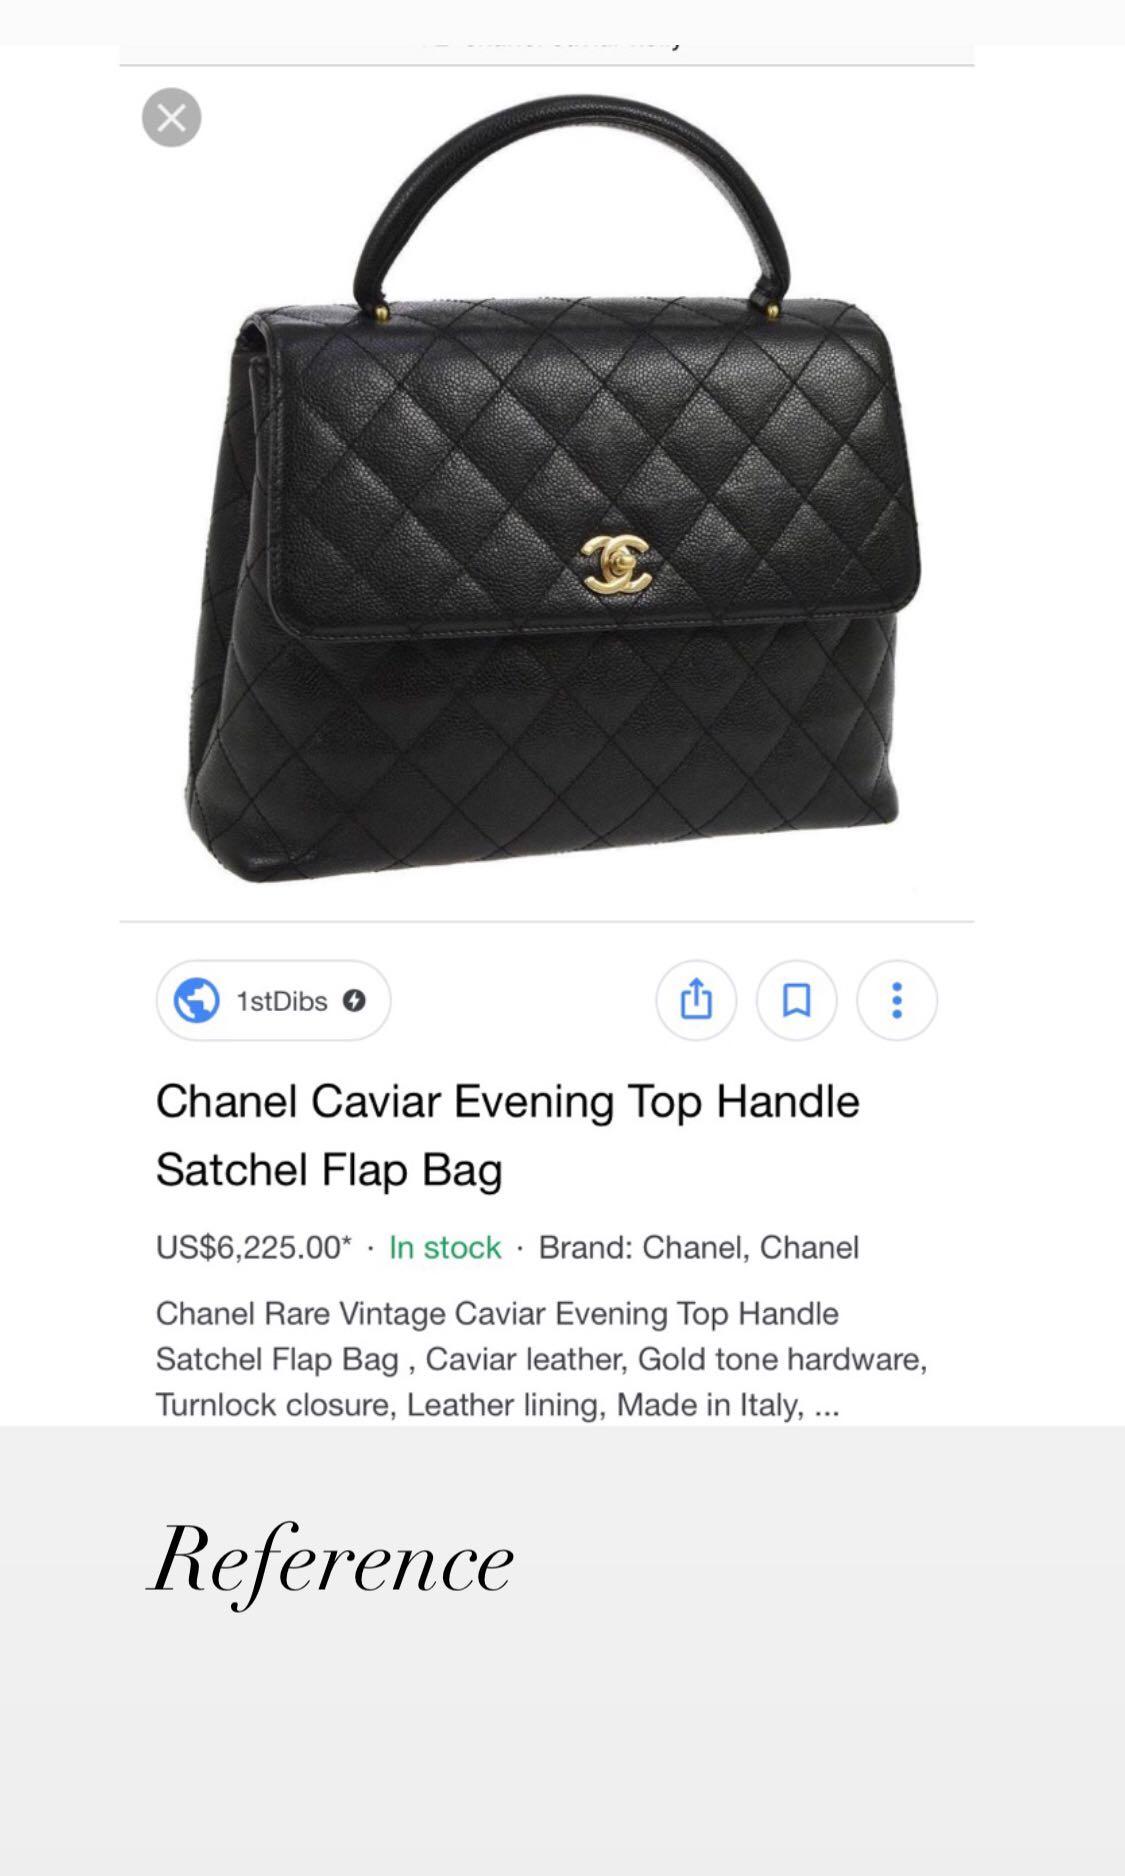 Chanel Classique Sunglasses Bag/Case in pink caviar quilted leather,  Champagne HW at 1stDibs